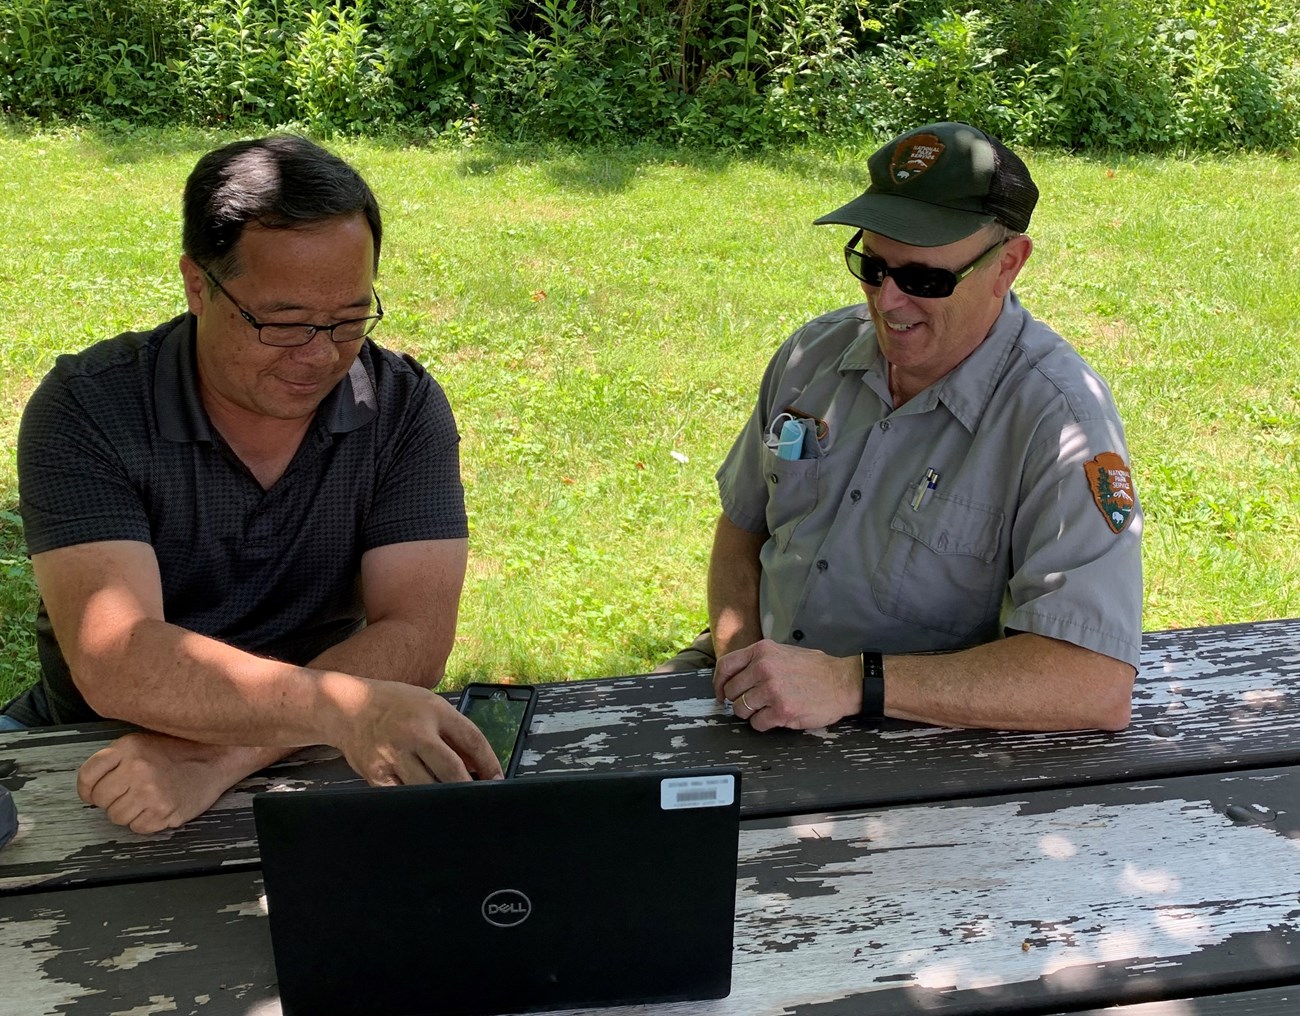 Two men sit outside at a picnic table; the man to the left wears a gray polo shirt and types on a black laptop; the man on the right wears a gray uniform shirt and green hat, which both contain the brown, green and white NPS arrowhead symbol.